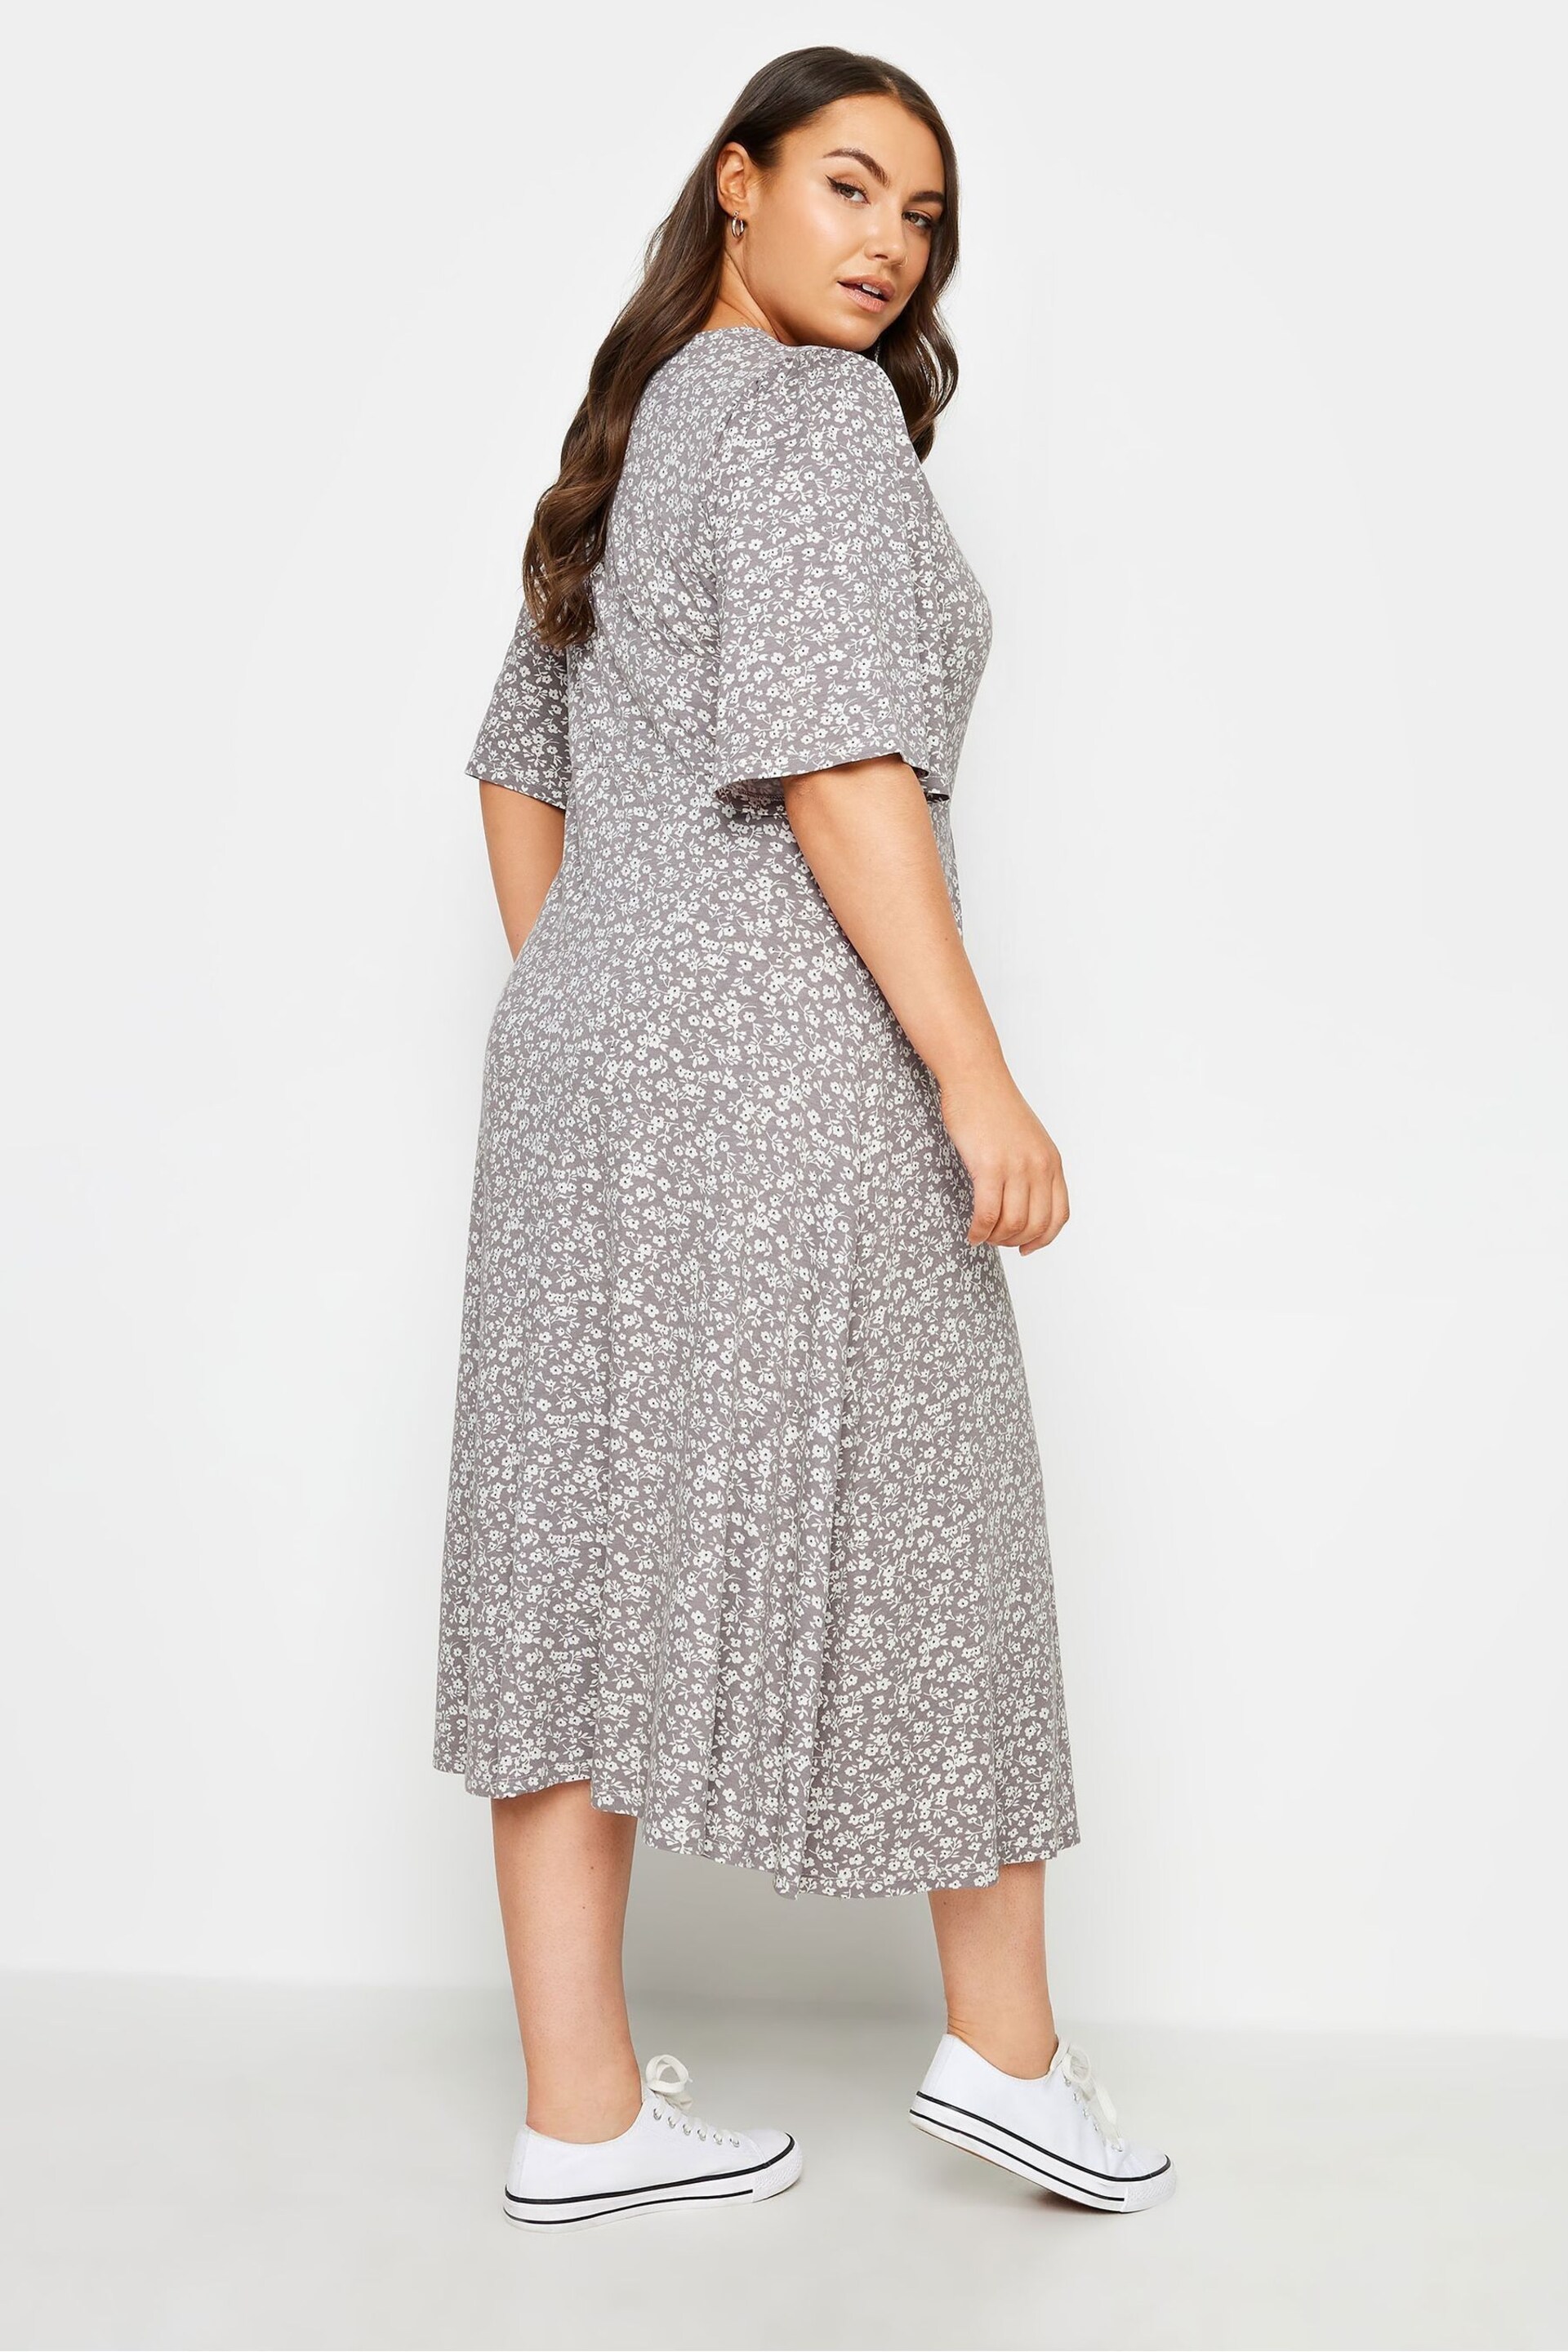 Yours Curve Grey Floral Maxi Wrap Dress - Image 2 of 4